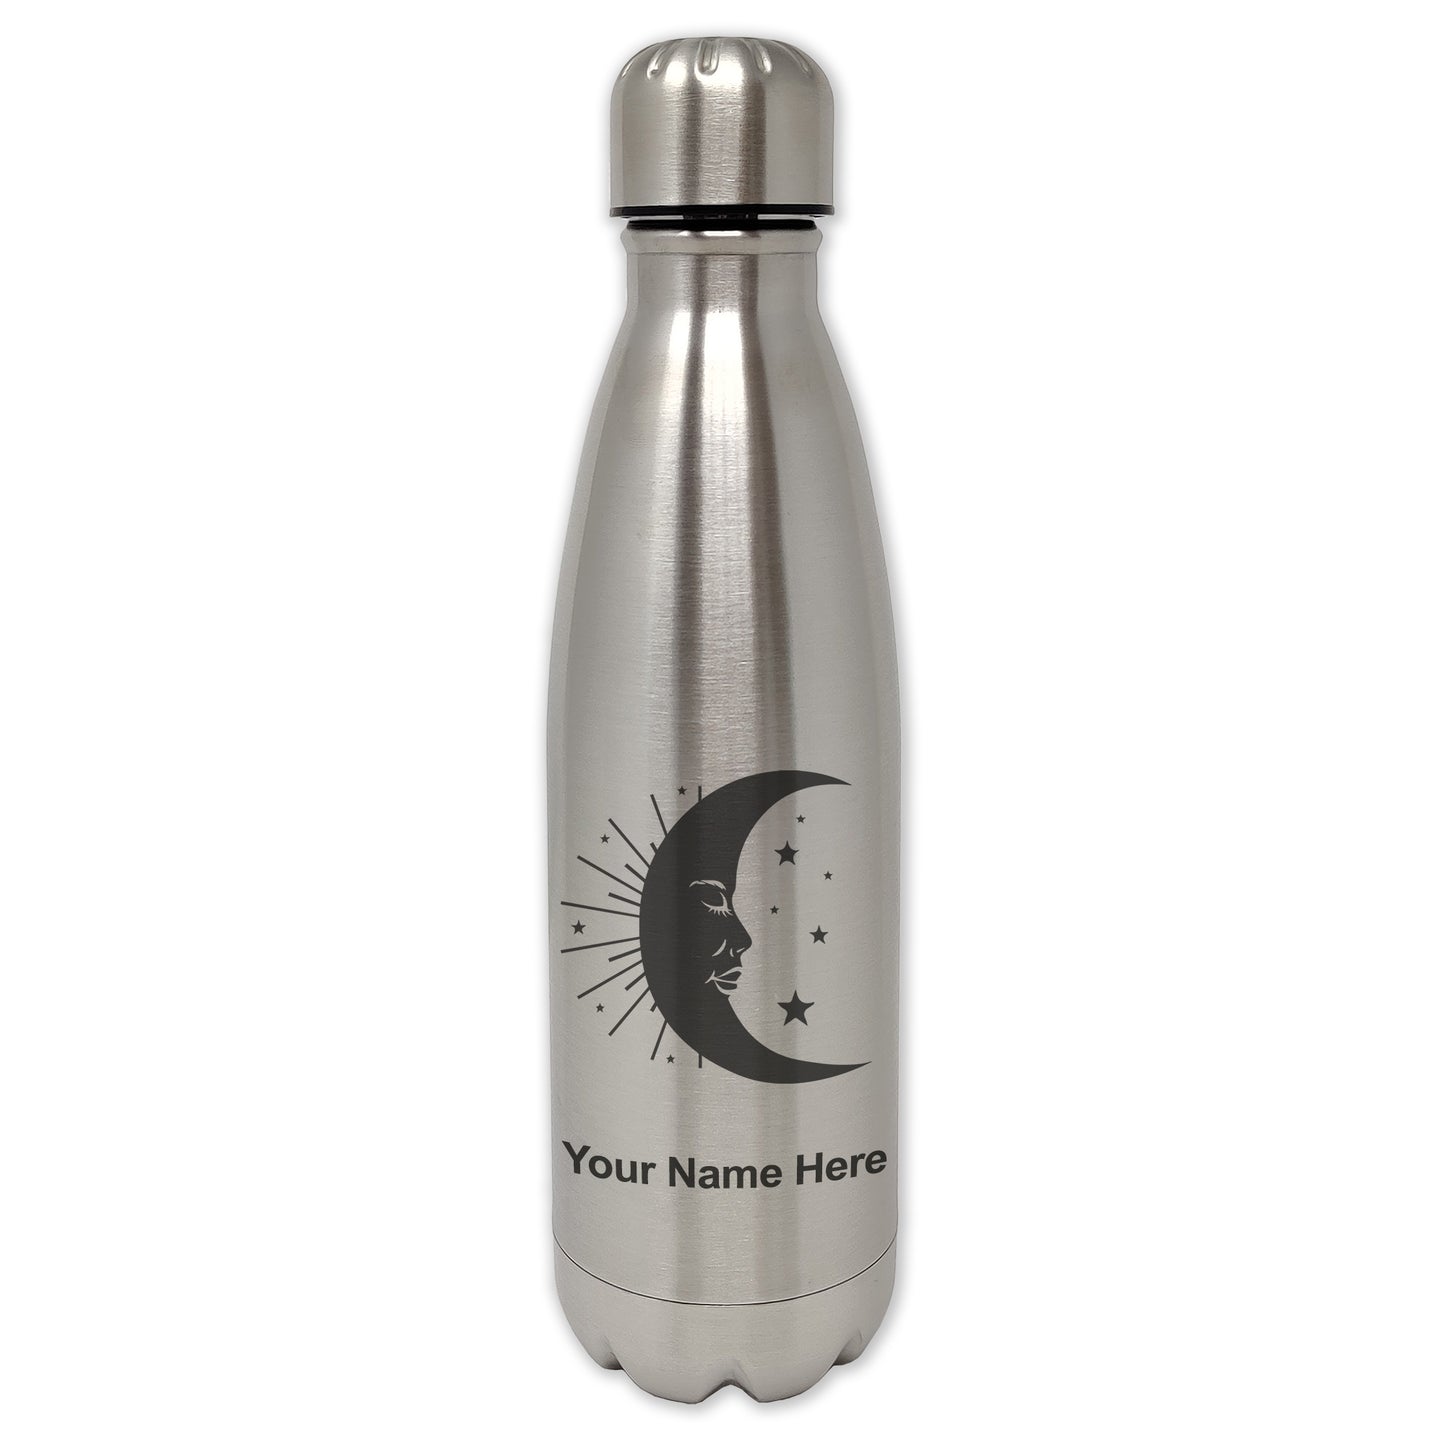 LaserGram Single Wall Water Bottle, Moon, Personalized Engraving Included